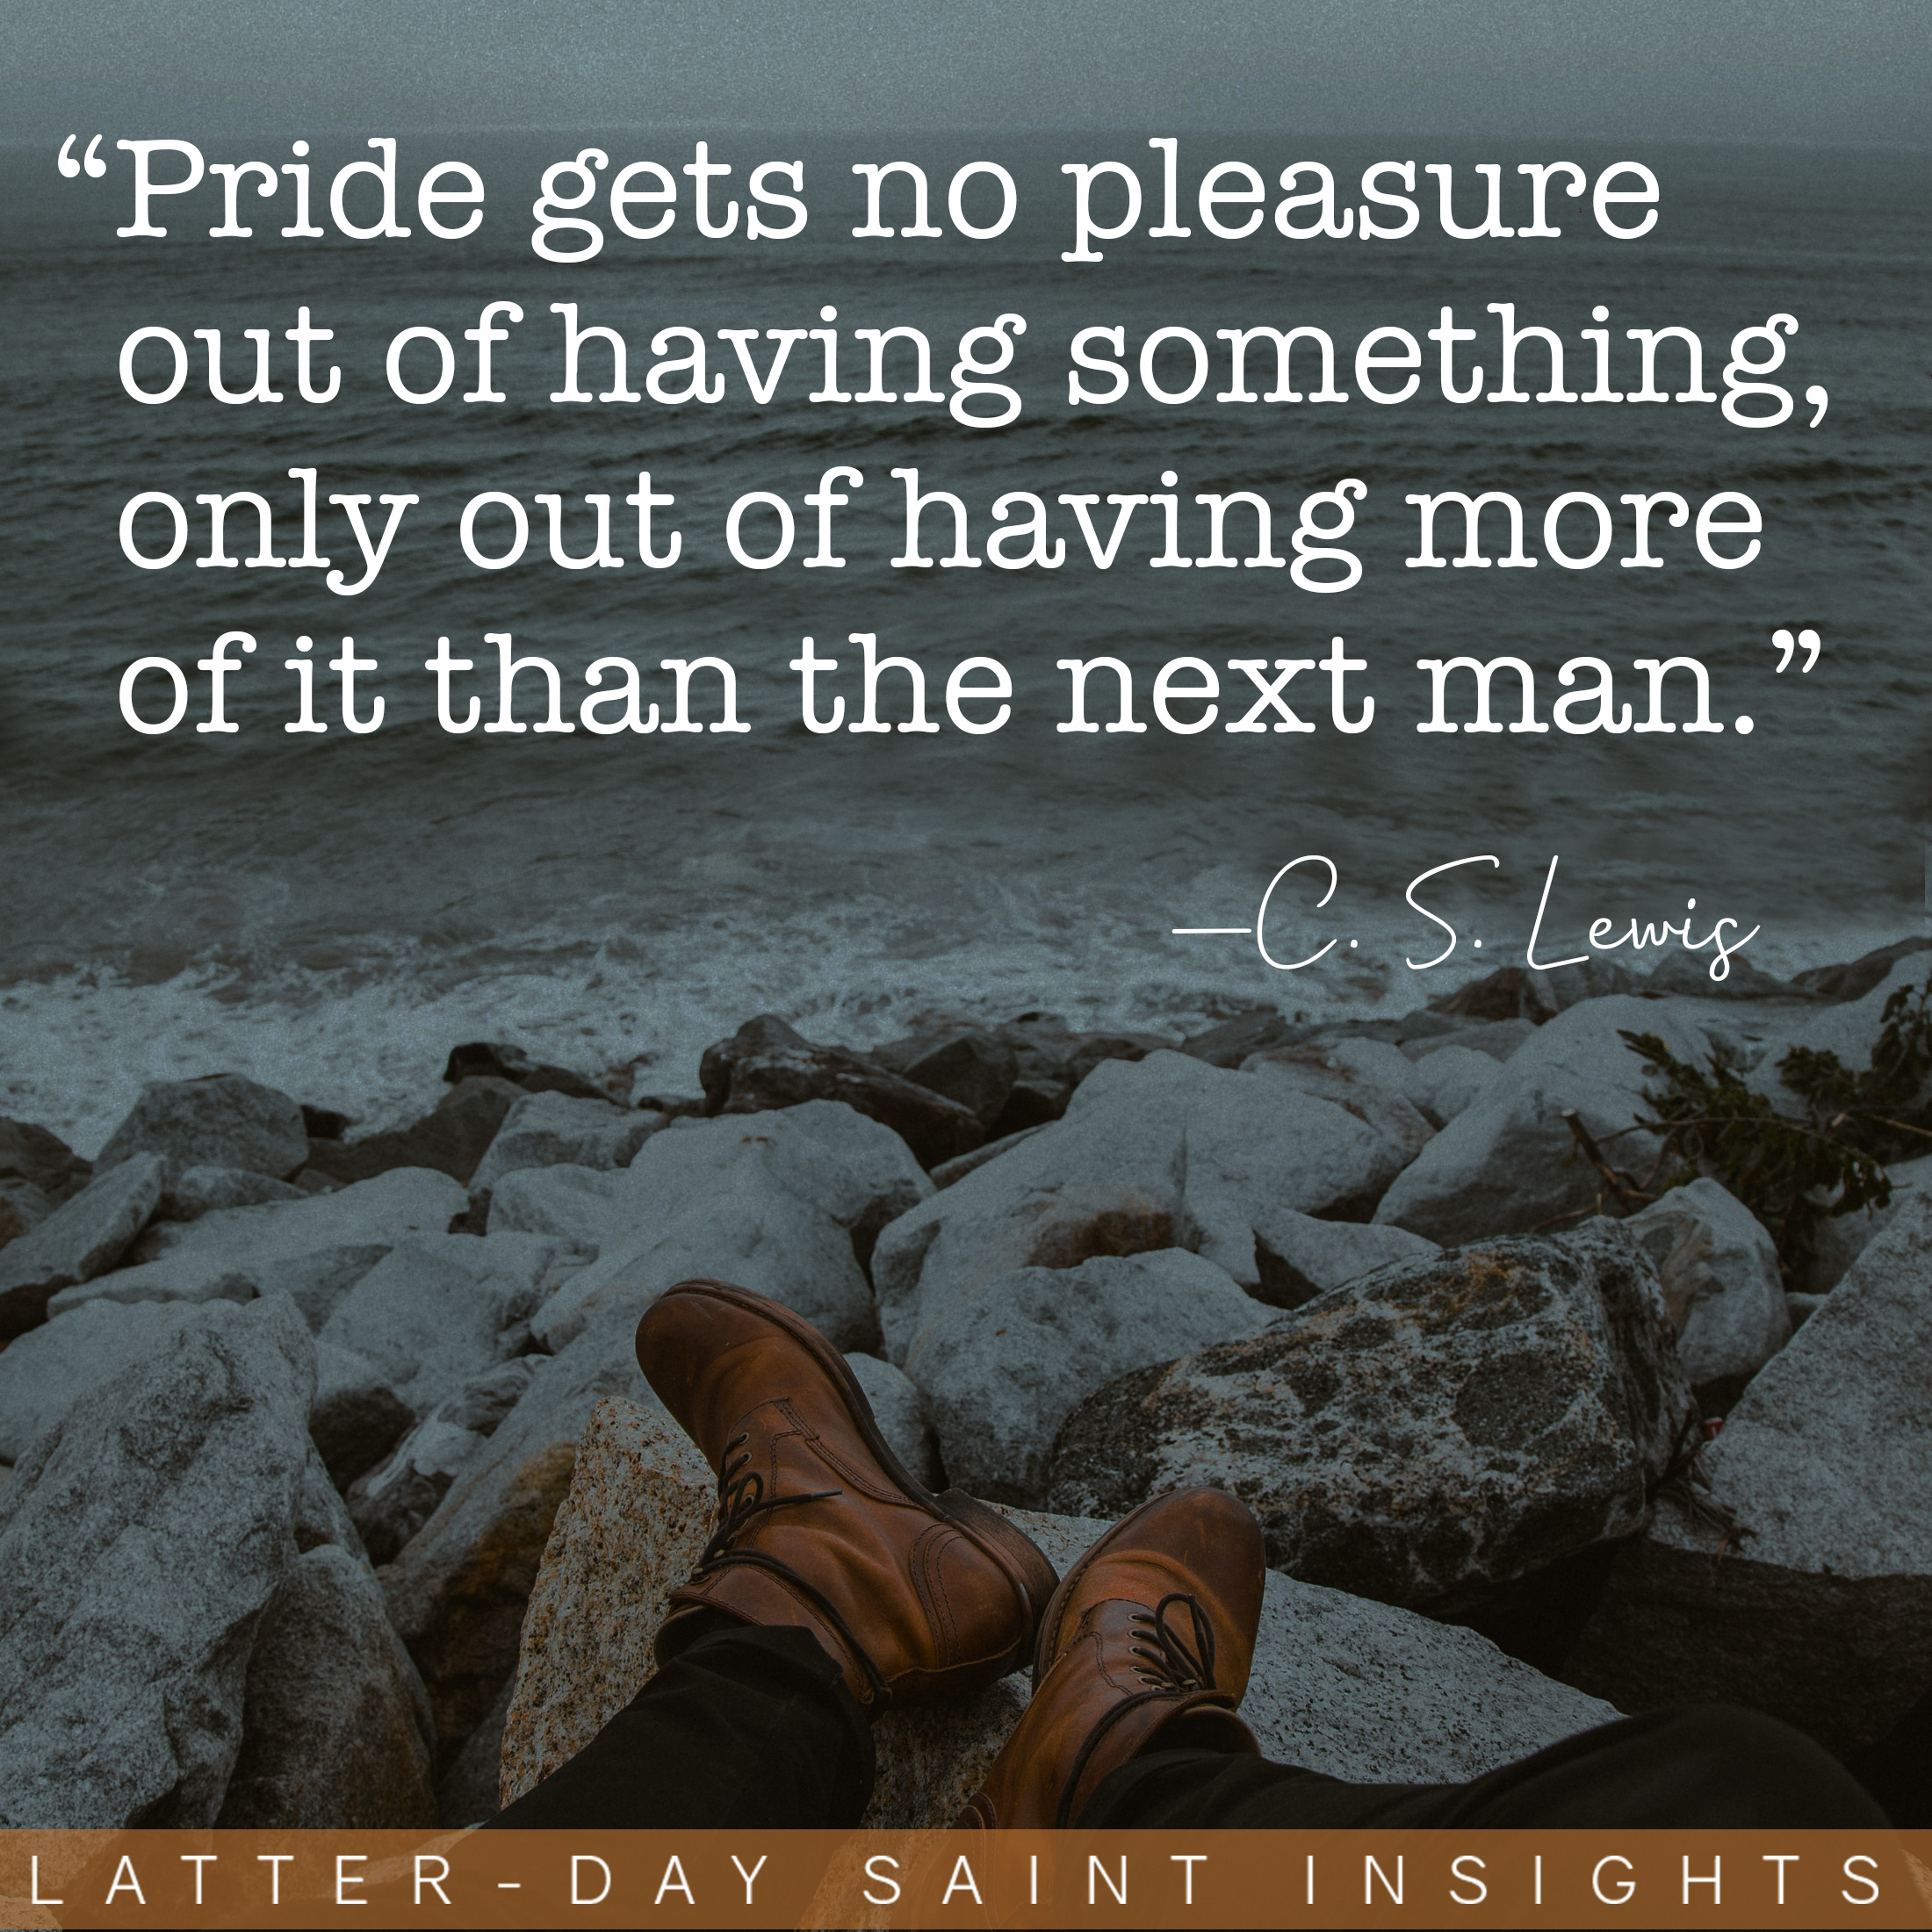 A person sitting on rocks by the shore, with a quote by C.S. Lewis that says, "Pride gets no pleasure out of having something, only out of having more of it than the next man."